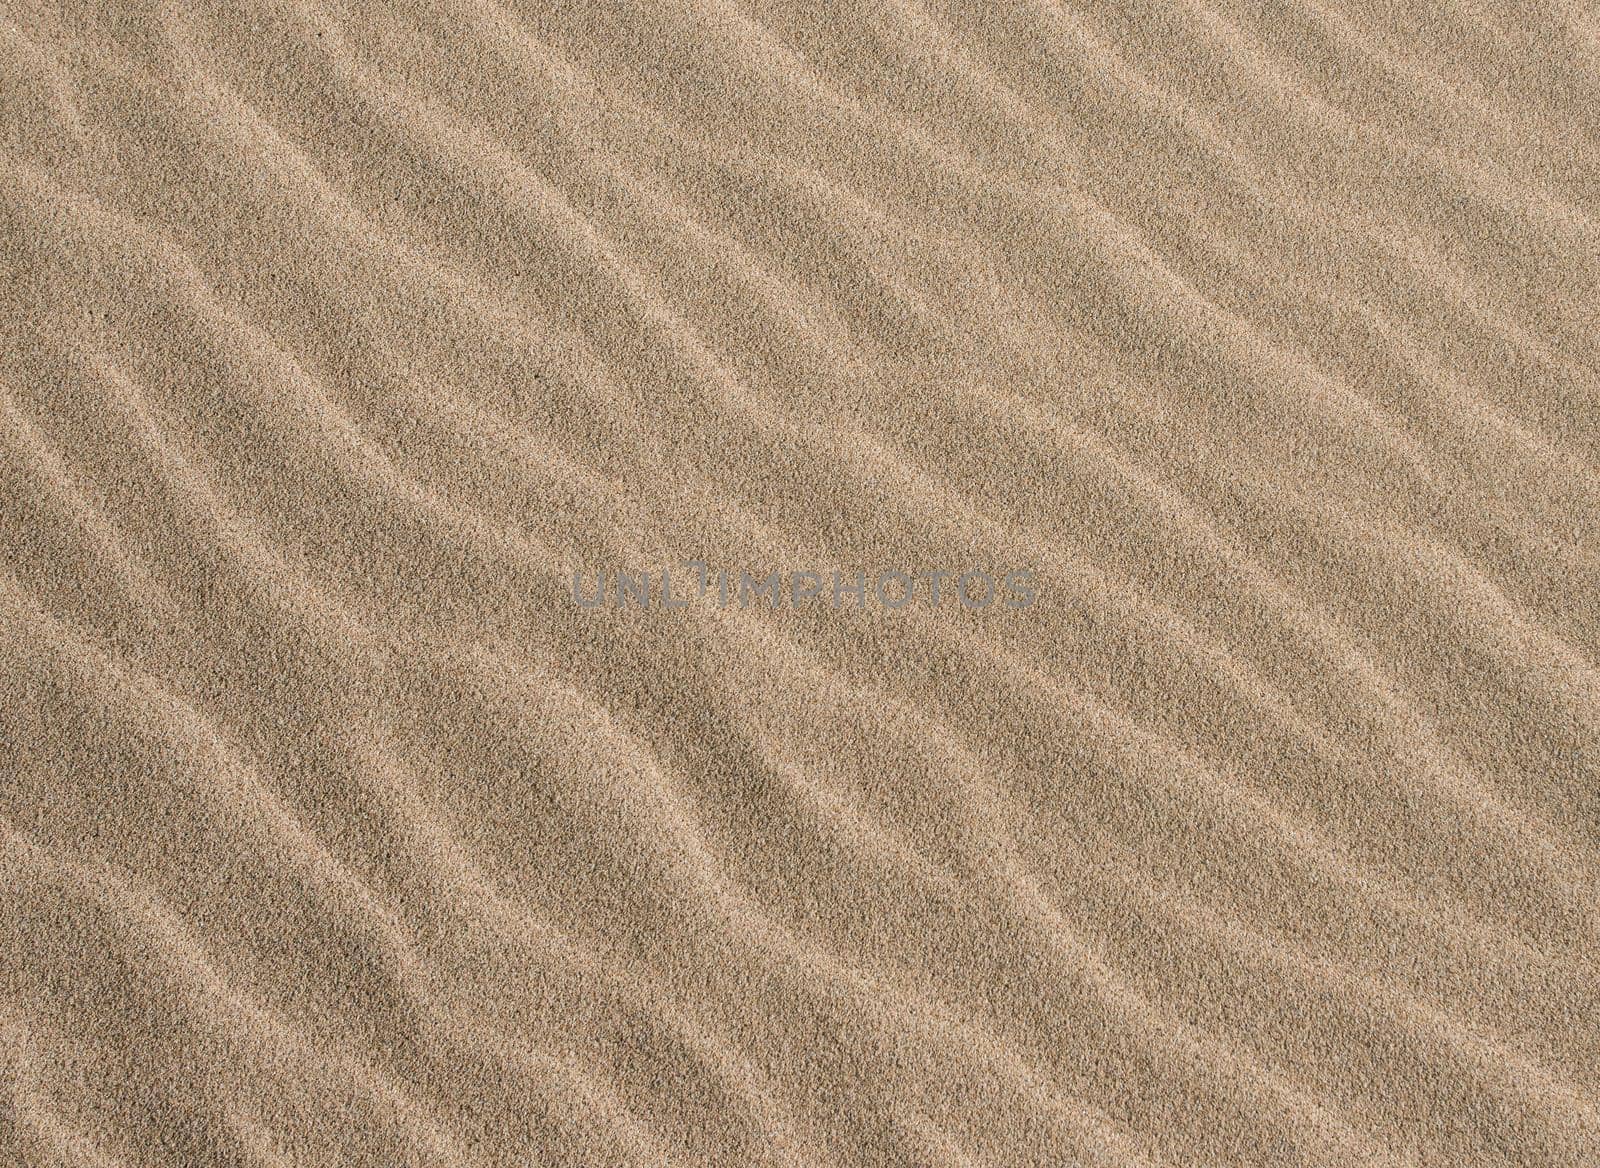 Simple sandy ripples created from wind